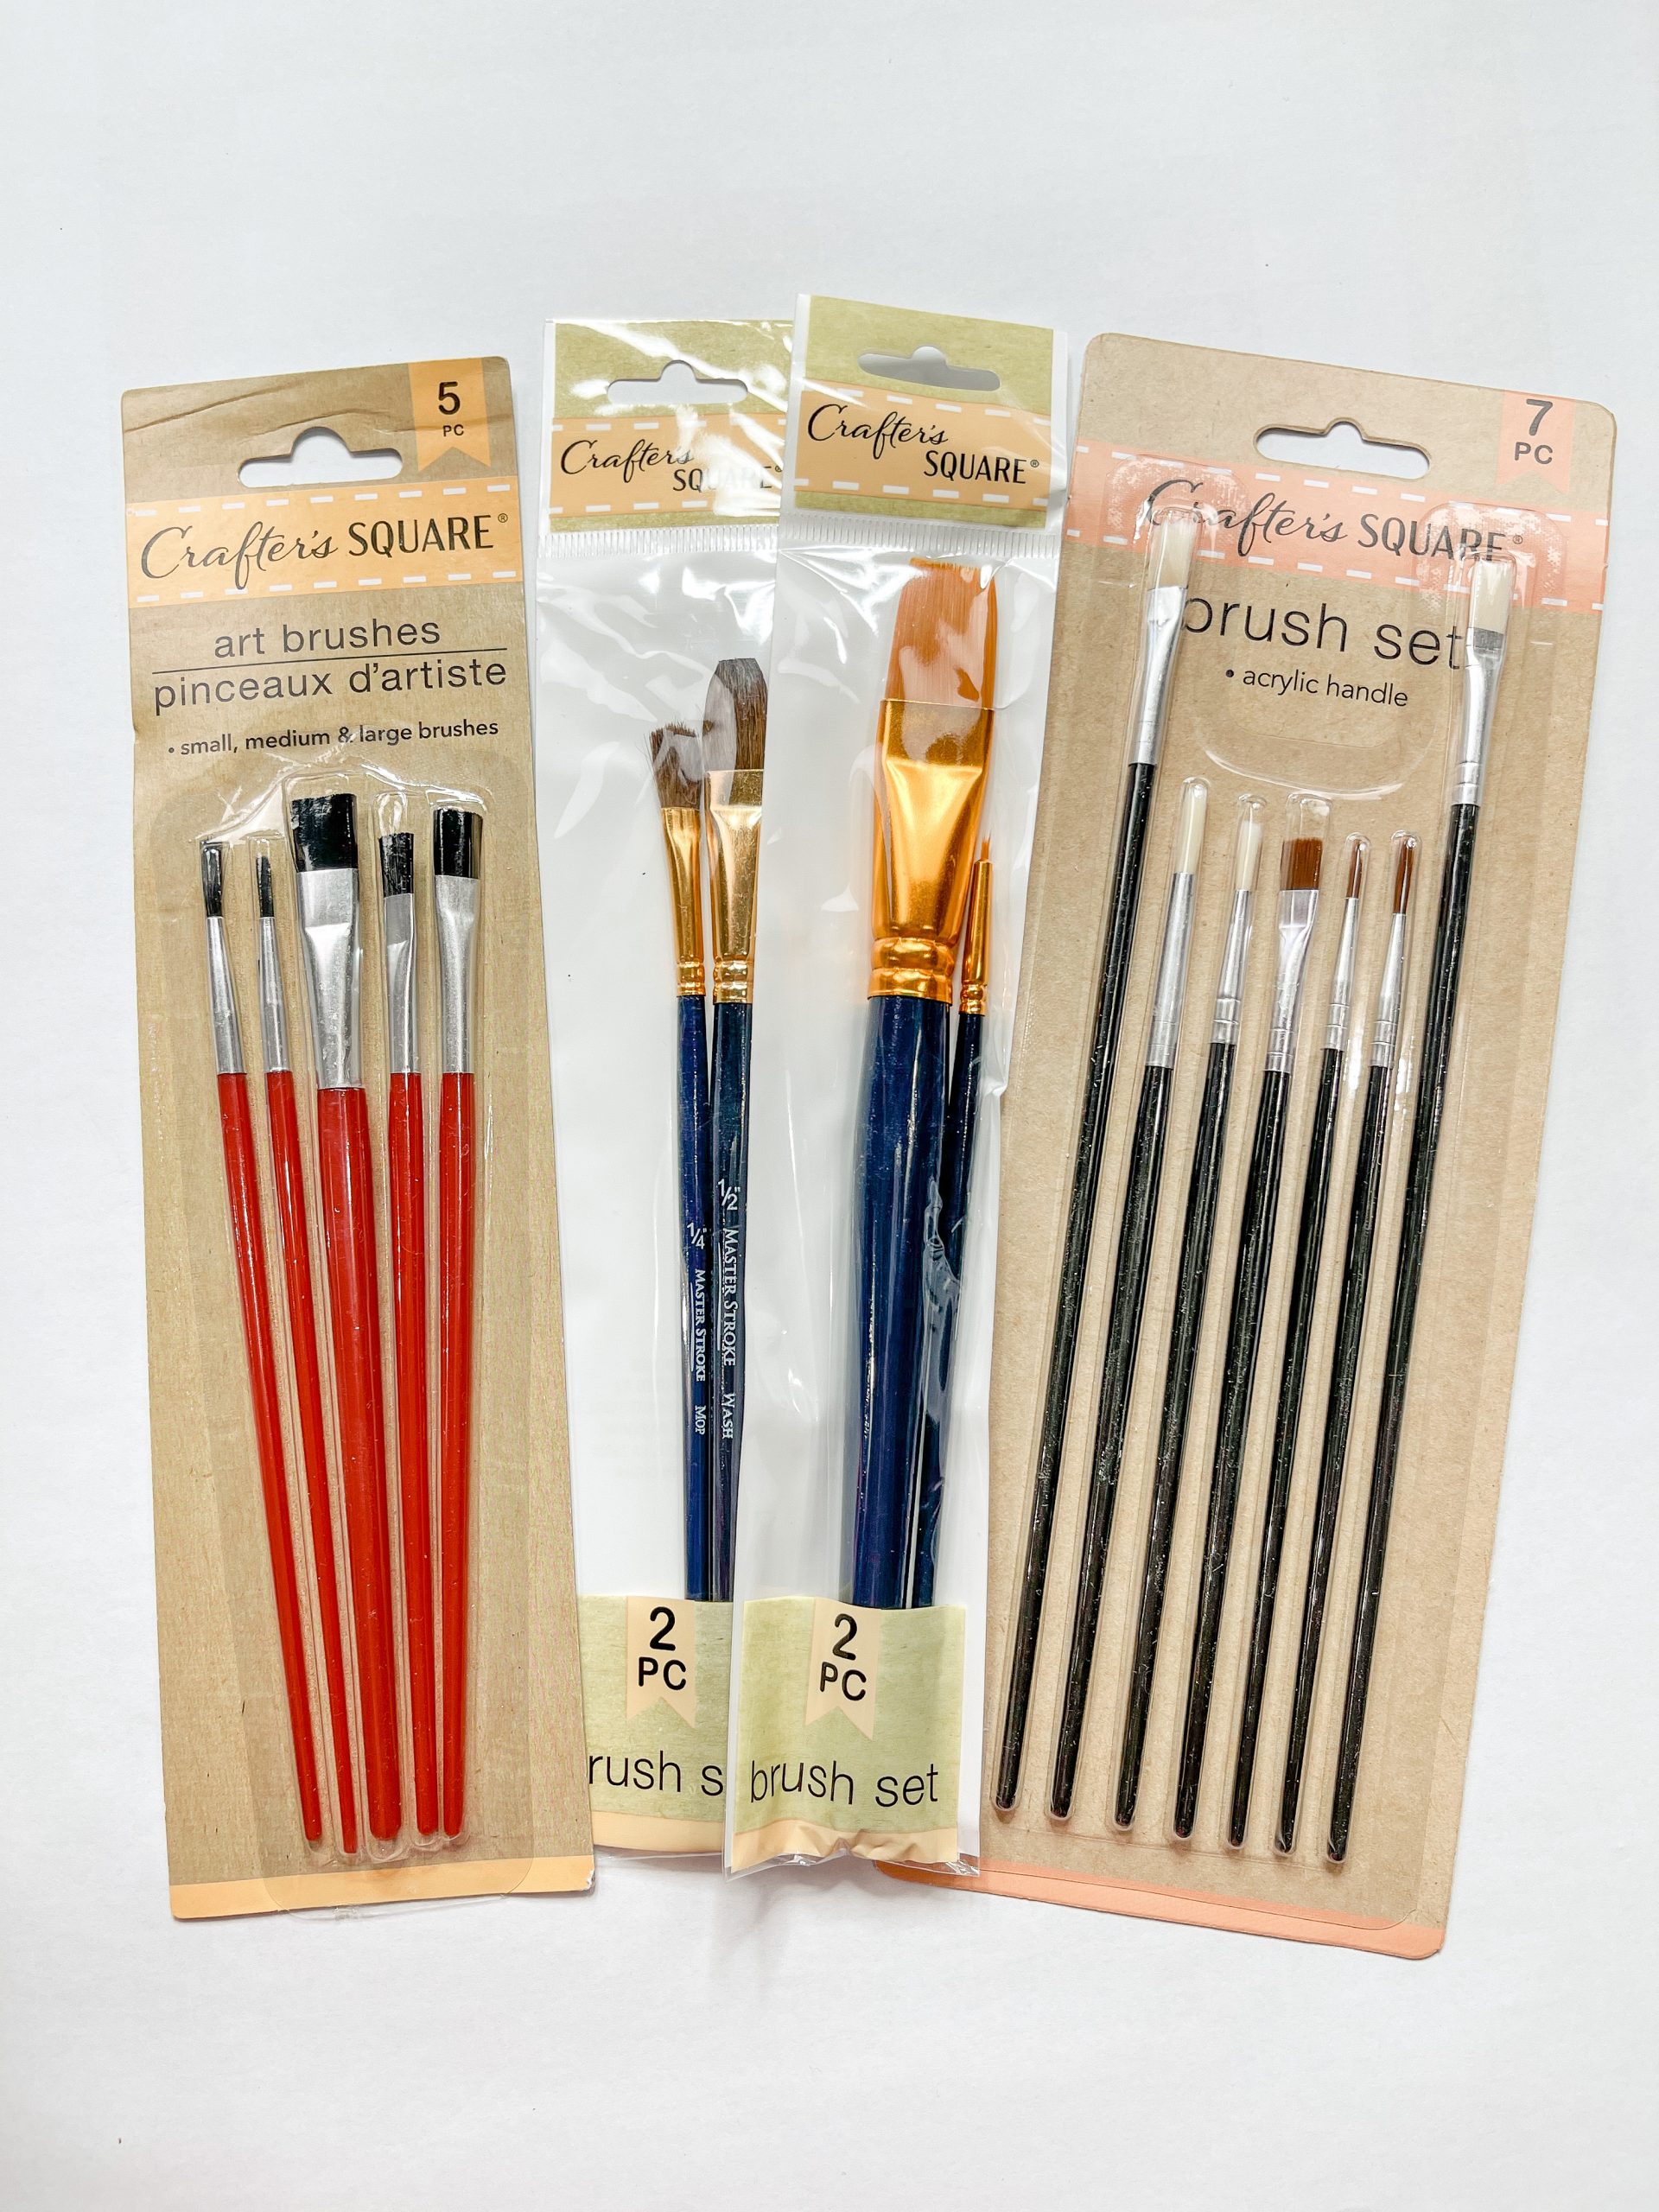 Dollar Tree Crafters Square paint brushes - Acrylic Painting DIY